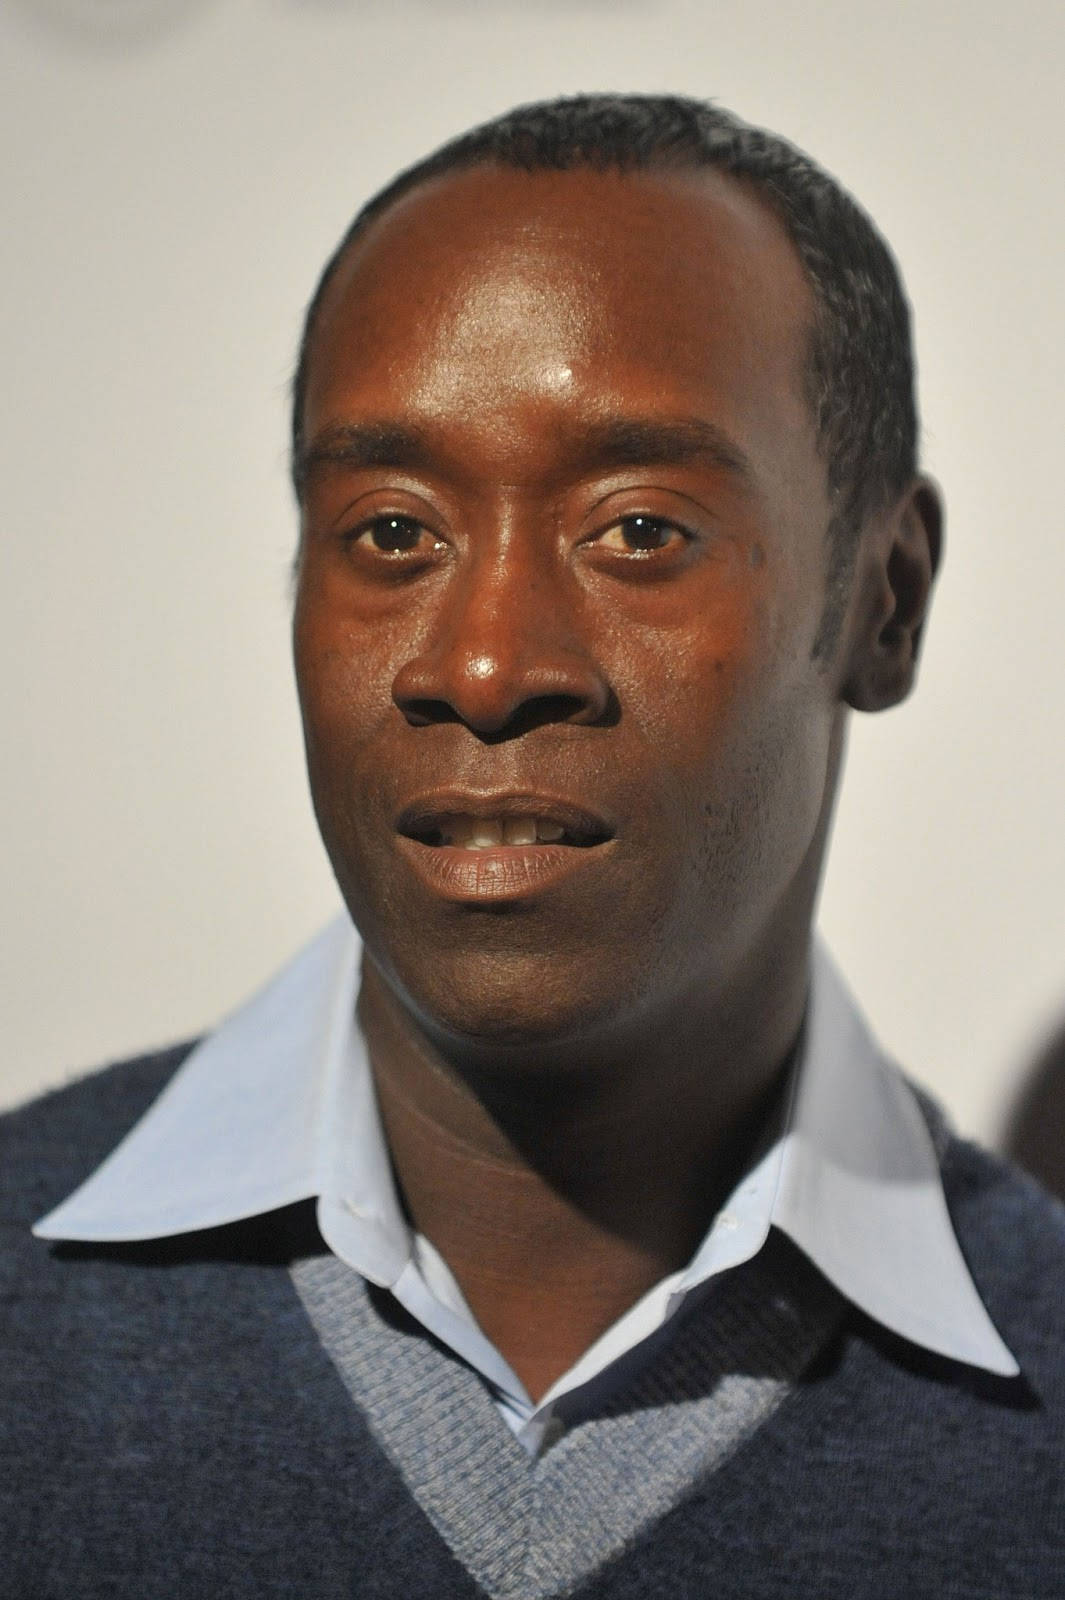 Don Cheadle Looking Sophisticated in Blazer Wallpaper